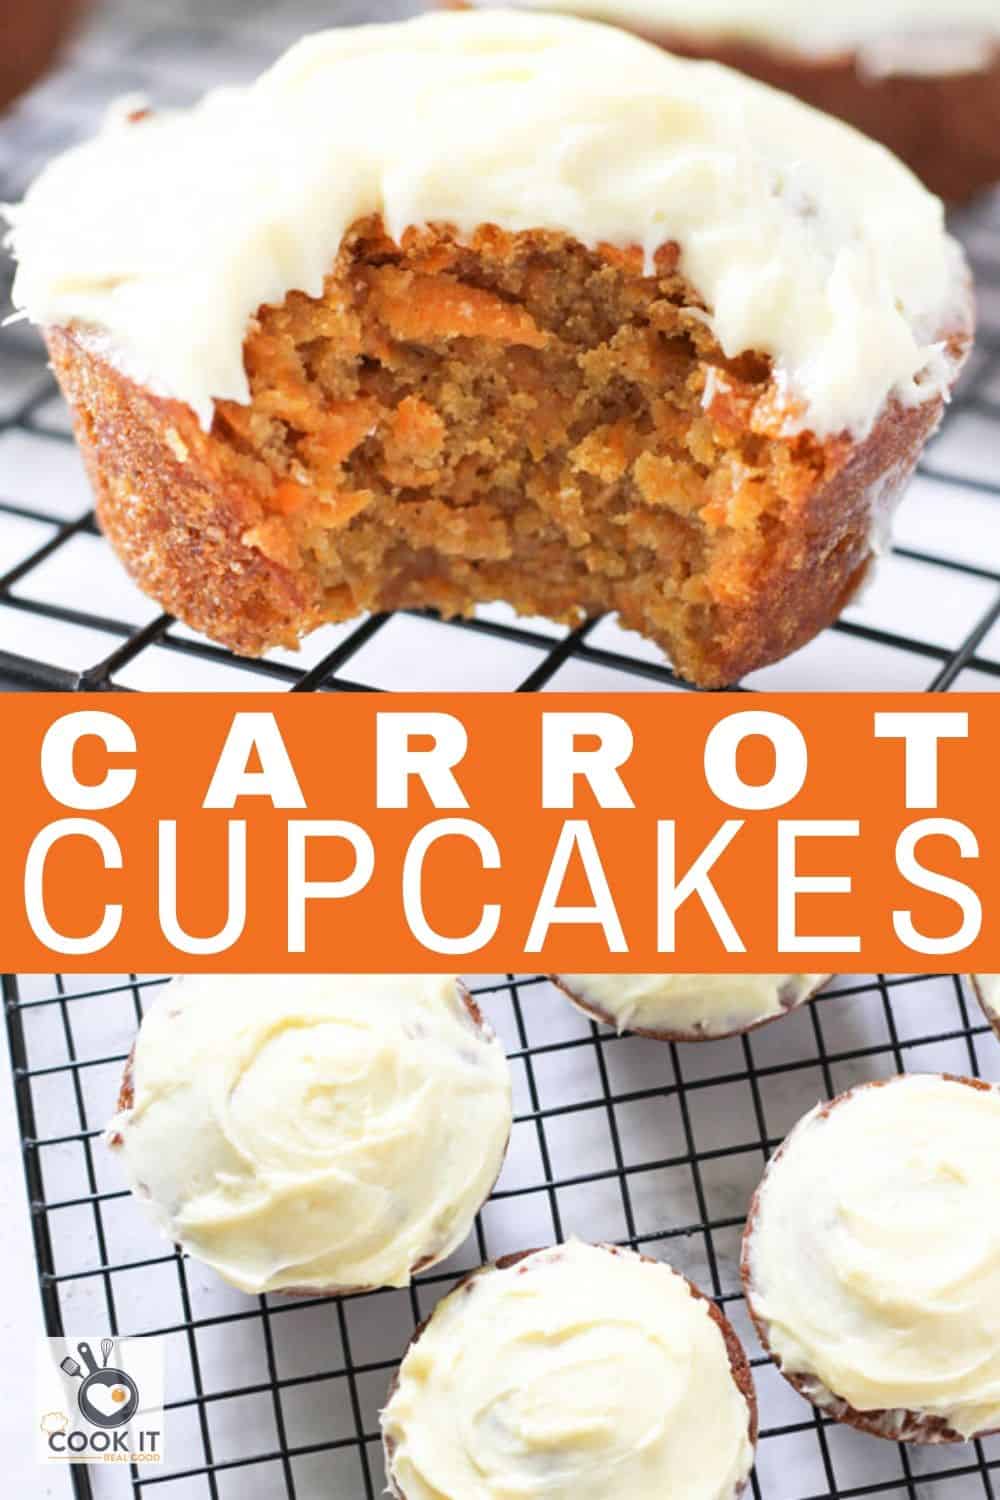 Carrot Cupcakes with Cream Cheese Frosting - Cook it Real Good